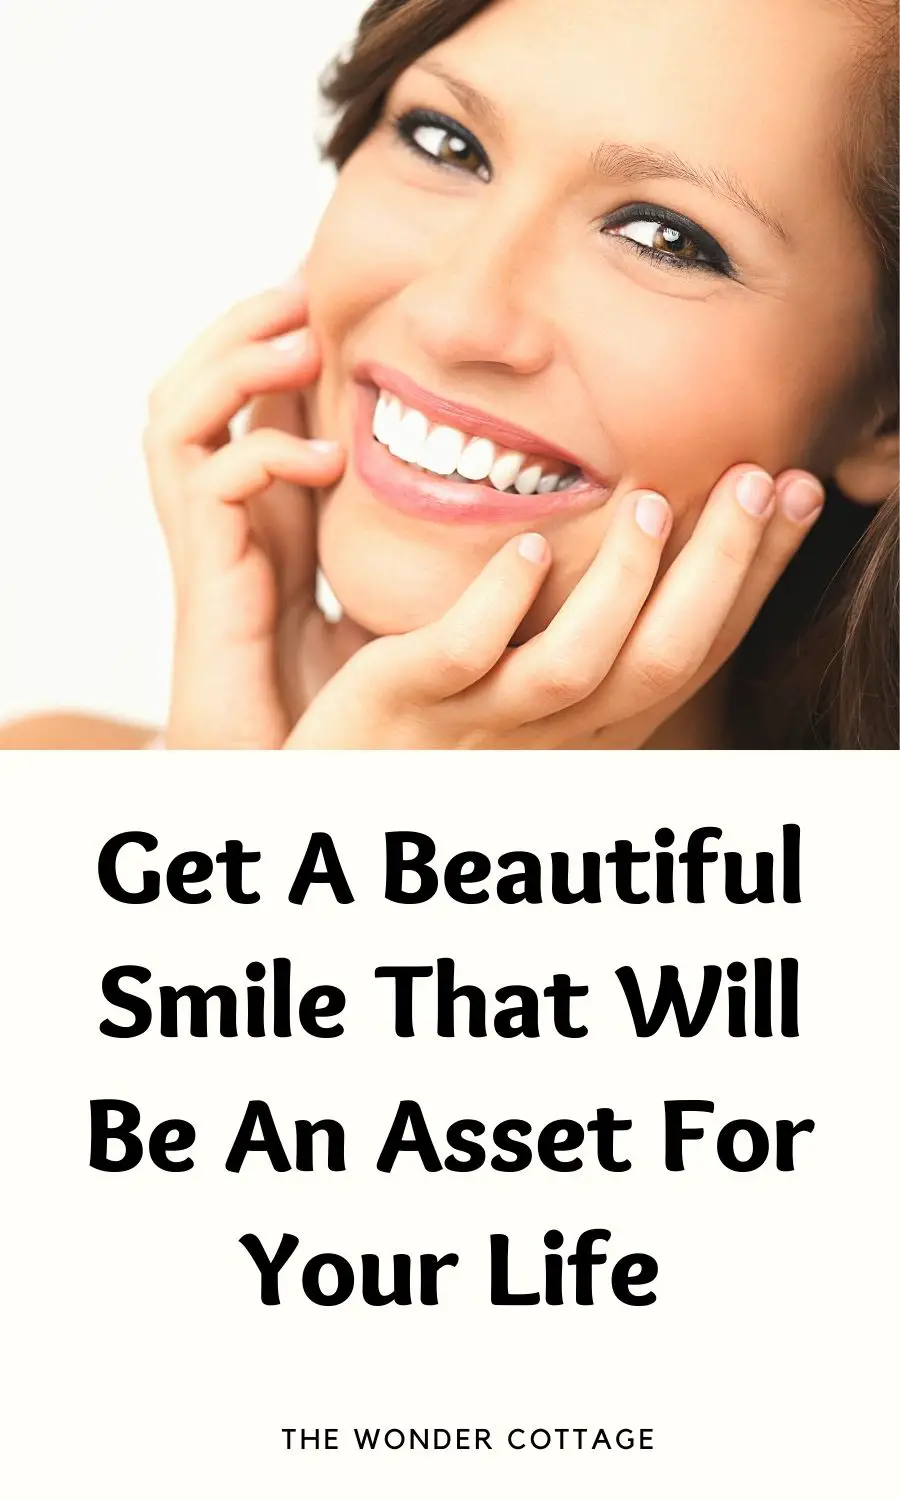 Get A Beautiful Smile That Will Be An Asset For Your Life